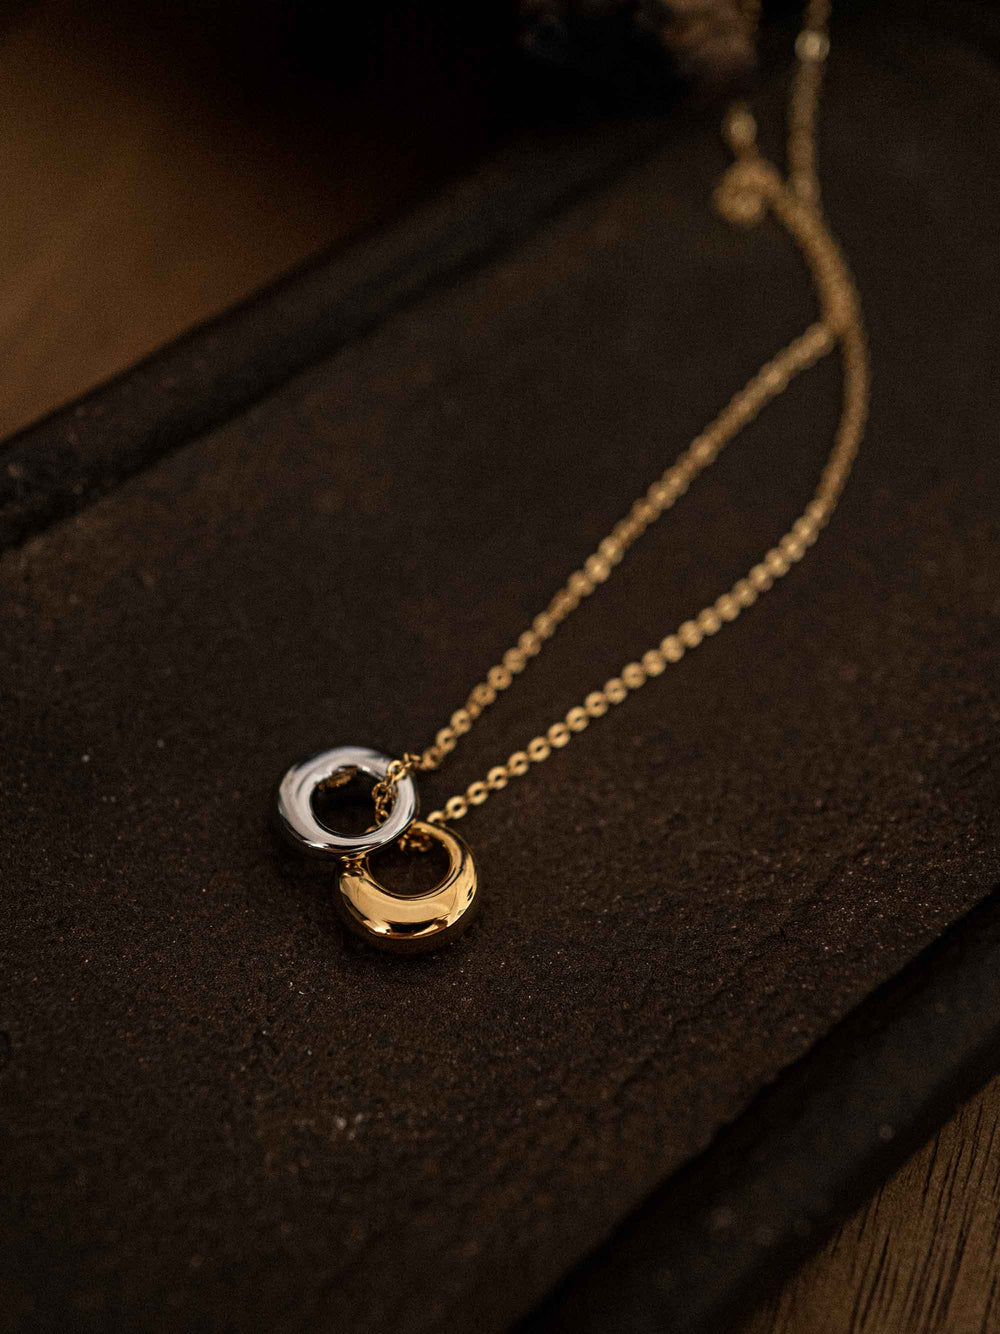 A gold necklace with gold and silver circles